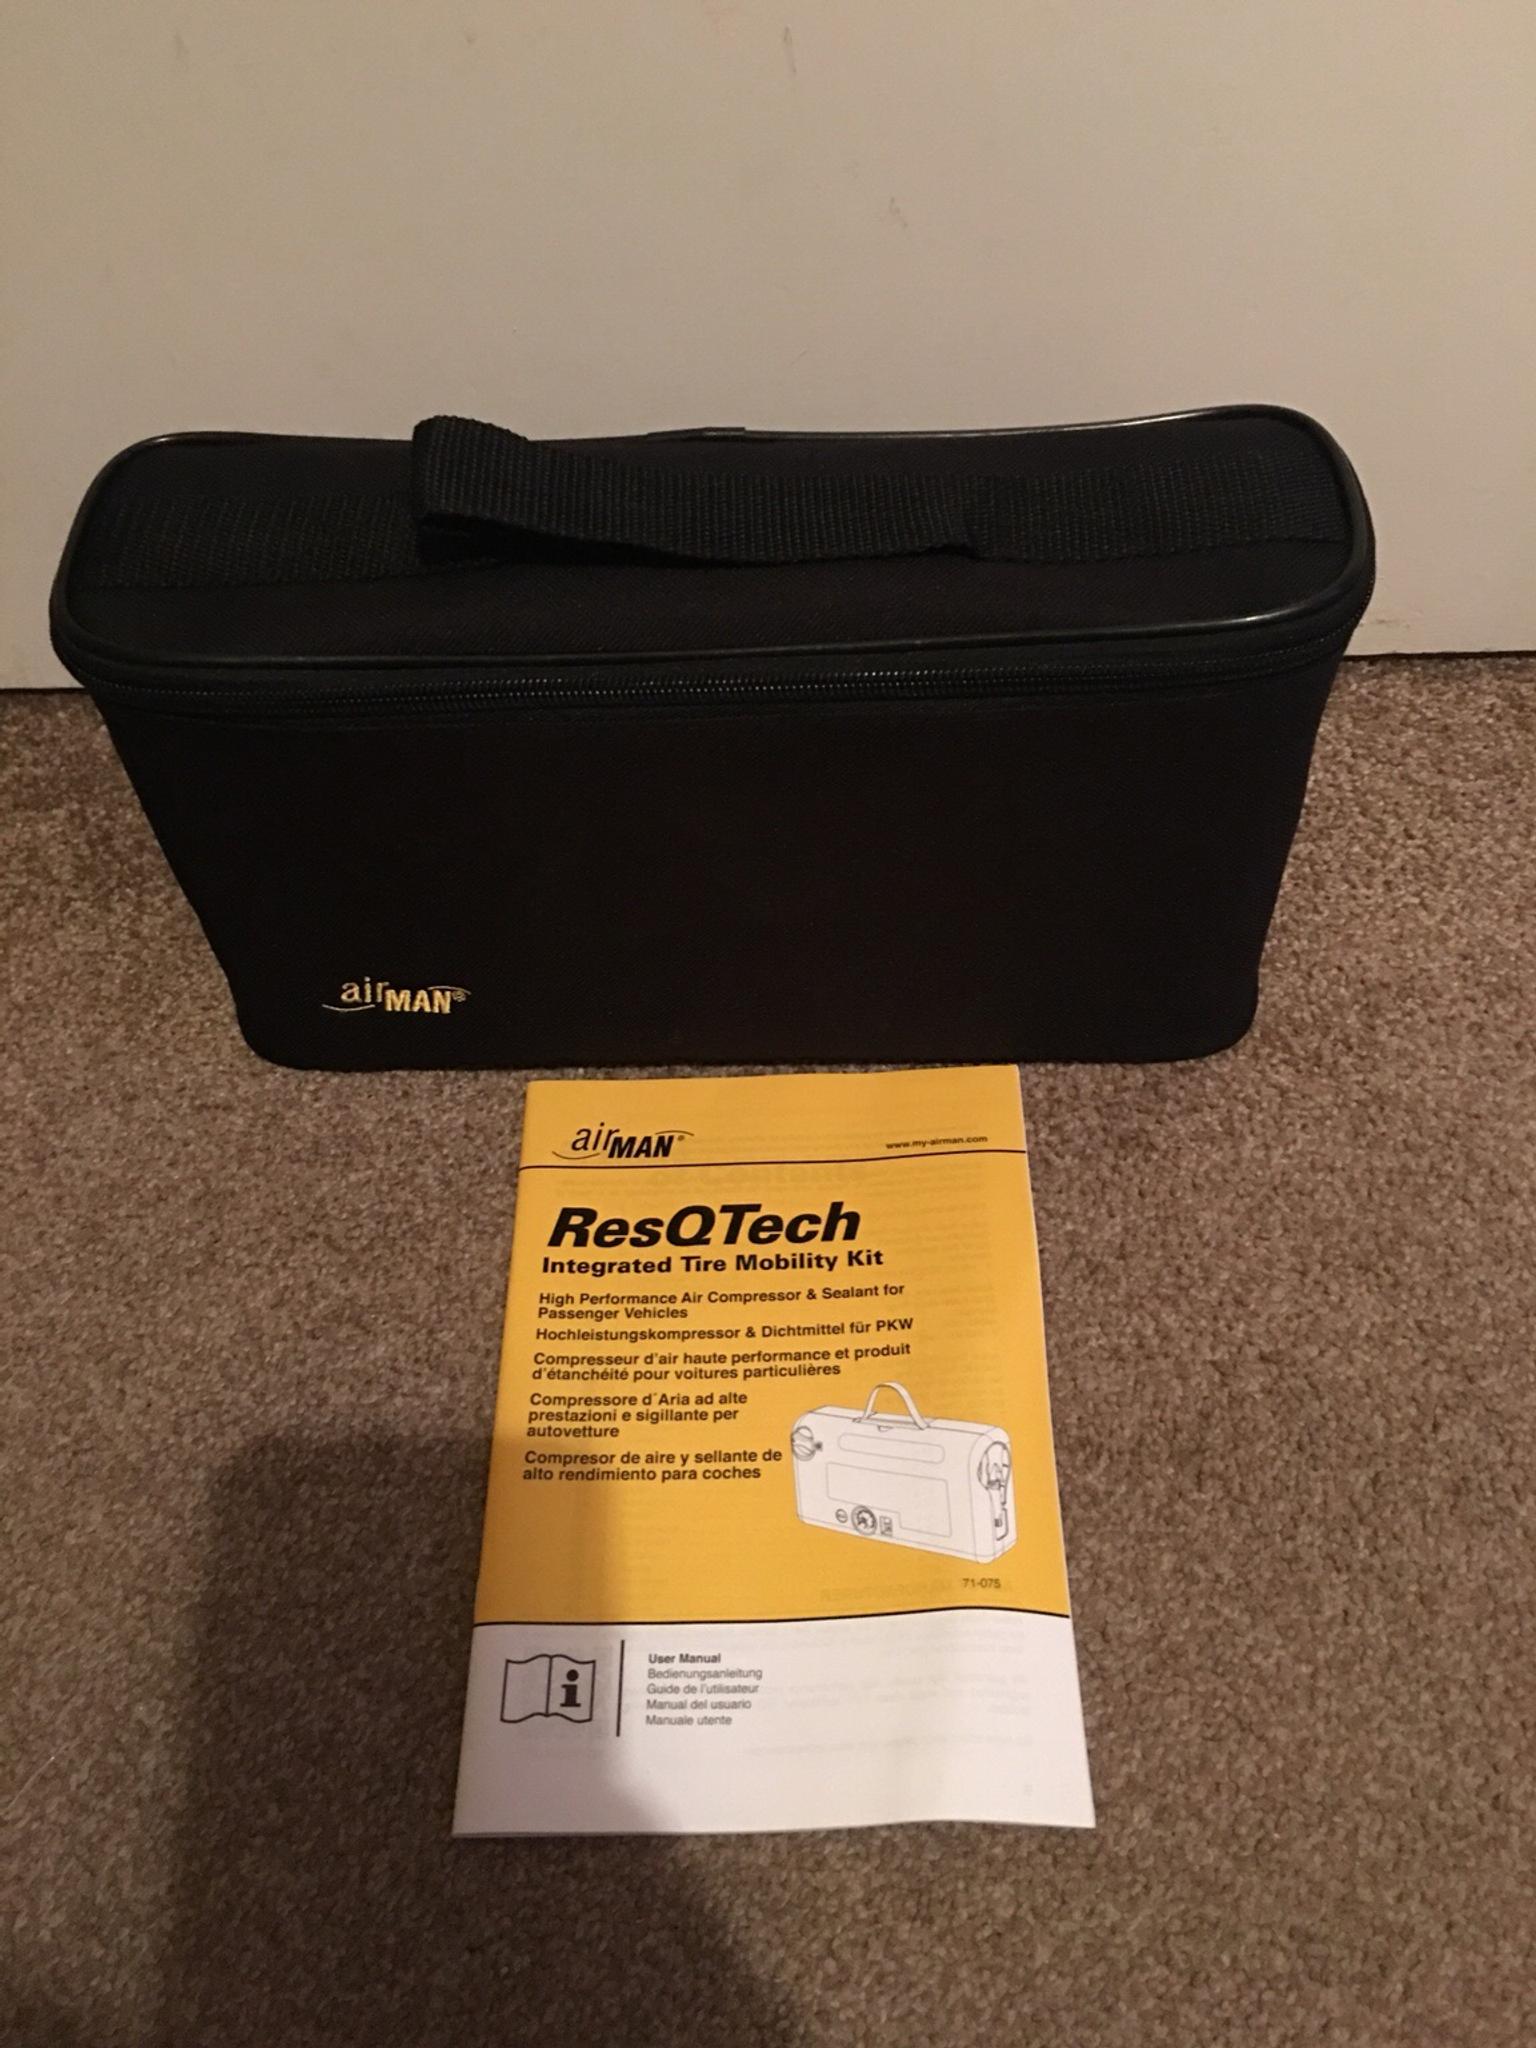 Air compressor AIRMAN ResQTech in BN3 Hove for £25.00 for sale | Shpock